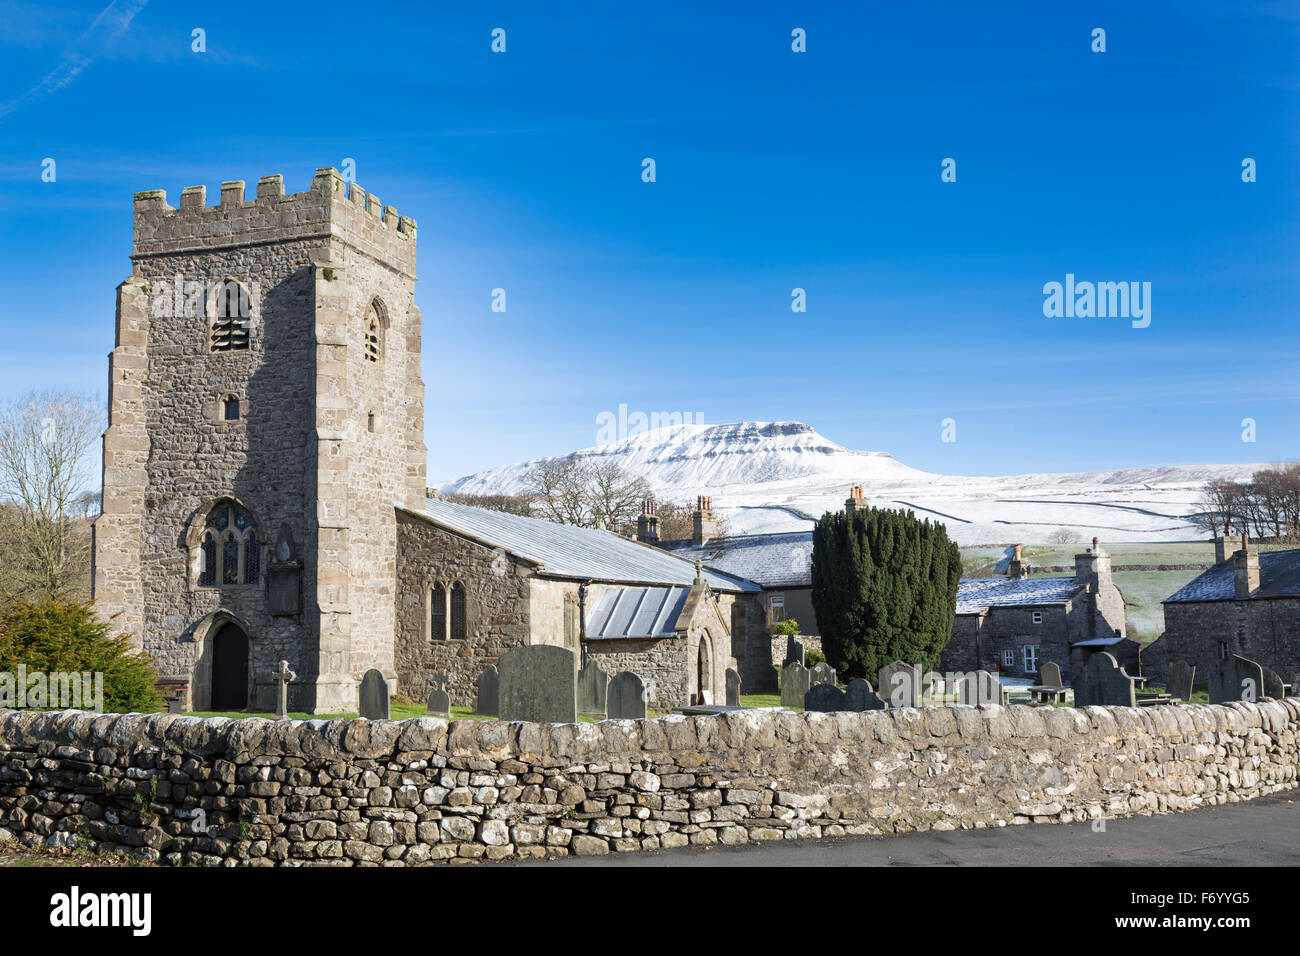 Horton in Ribblesdale church (St Oswalds), with a snow covered Pen-y-ghent mountain in the background Stock Photo